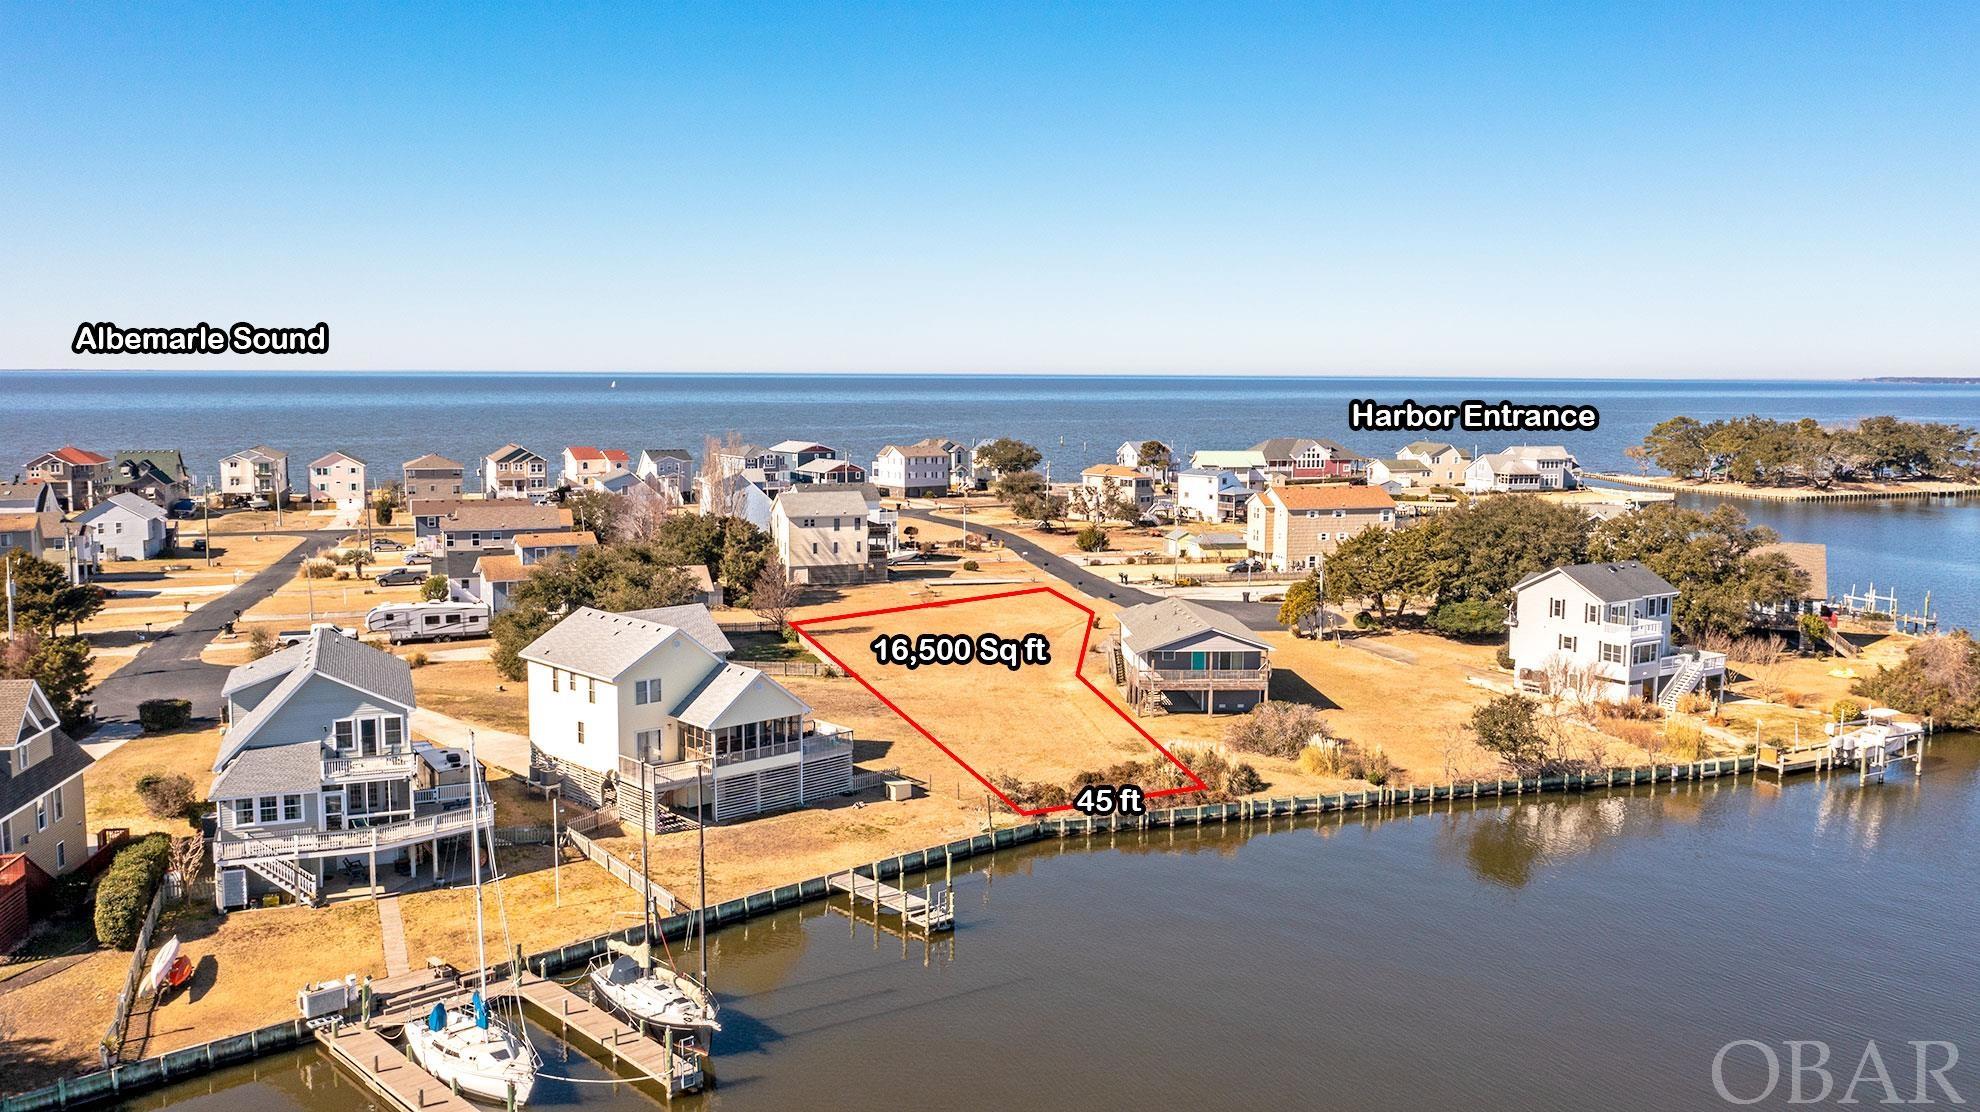 110 Club View Ct. is a RARE, beautiful, oversized canal front lot on a wide canal, just around the corner from the Harbor, providing great protection for your boat and, quick and easy access to the Albemarle Sound! Build your dream home and bring your boat! Dare County shows the lot substantially in an X Flood Zone! You will enjoy beautiful views of the wide canal from your new home with potential for both harbor and sound views as well. All in a quiet neighborhood location in the gated community of Colington Harbour. Build a dock and add a boat lift and you will be all set for great fishing, crabbing, or a sunset cruze. Colington Harbour offers a sound side park, picnic pavilion area, playground, boat ramp, and a basket ball court. The pool, clubhouse, and tennis can be joined for an additional fee. Emanuelson & Dad installed a brand new vinyl bulkhead 8/13/22! Don't miss out on this rare opportunity! This listing is for Lot 1 SITE-LTS 61&62. Taxes and HOA fees are for both lots.